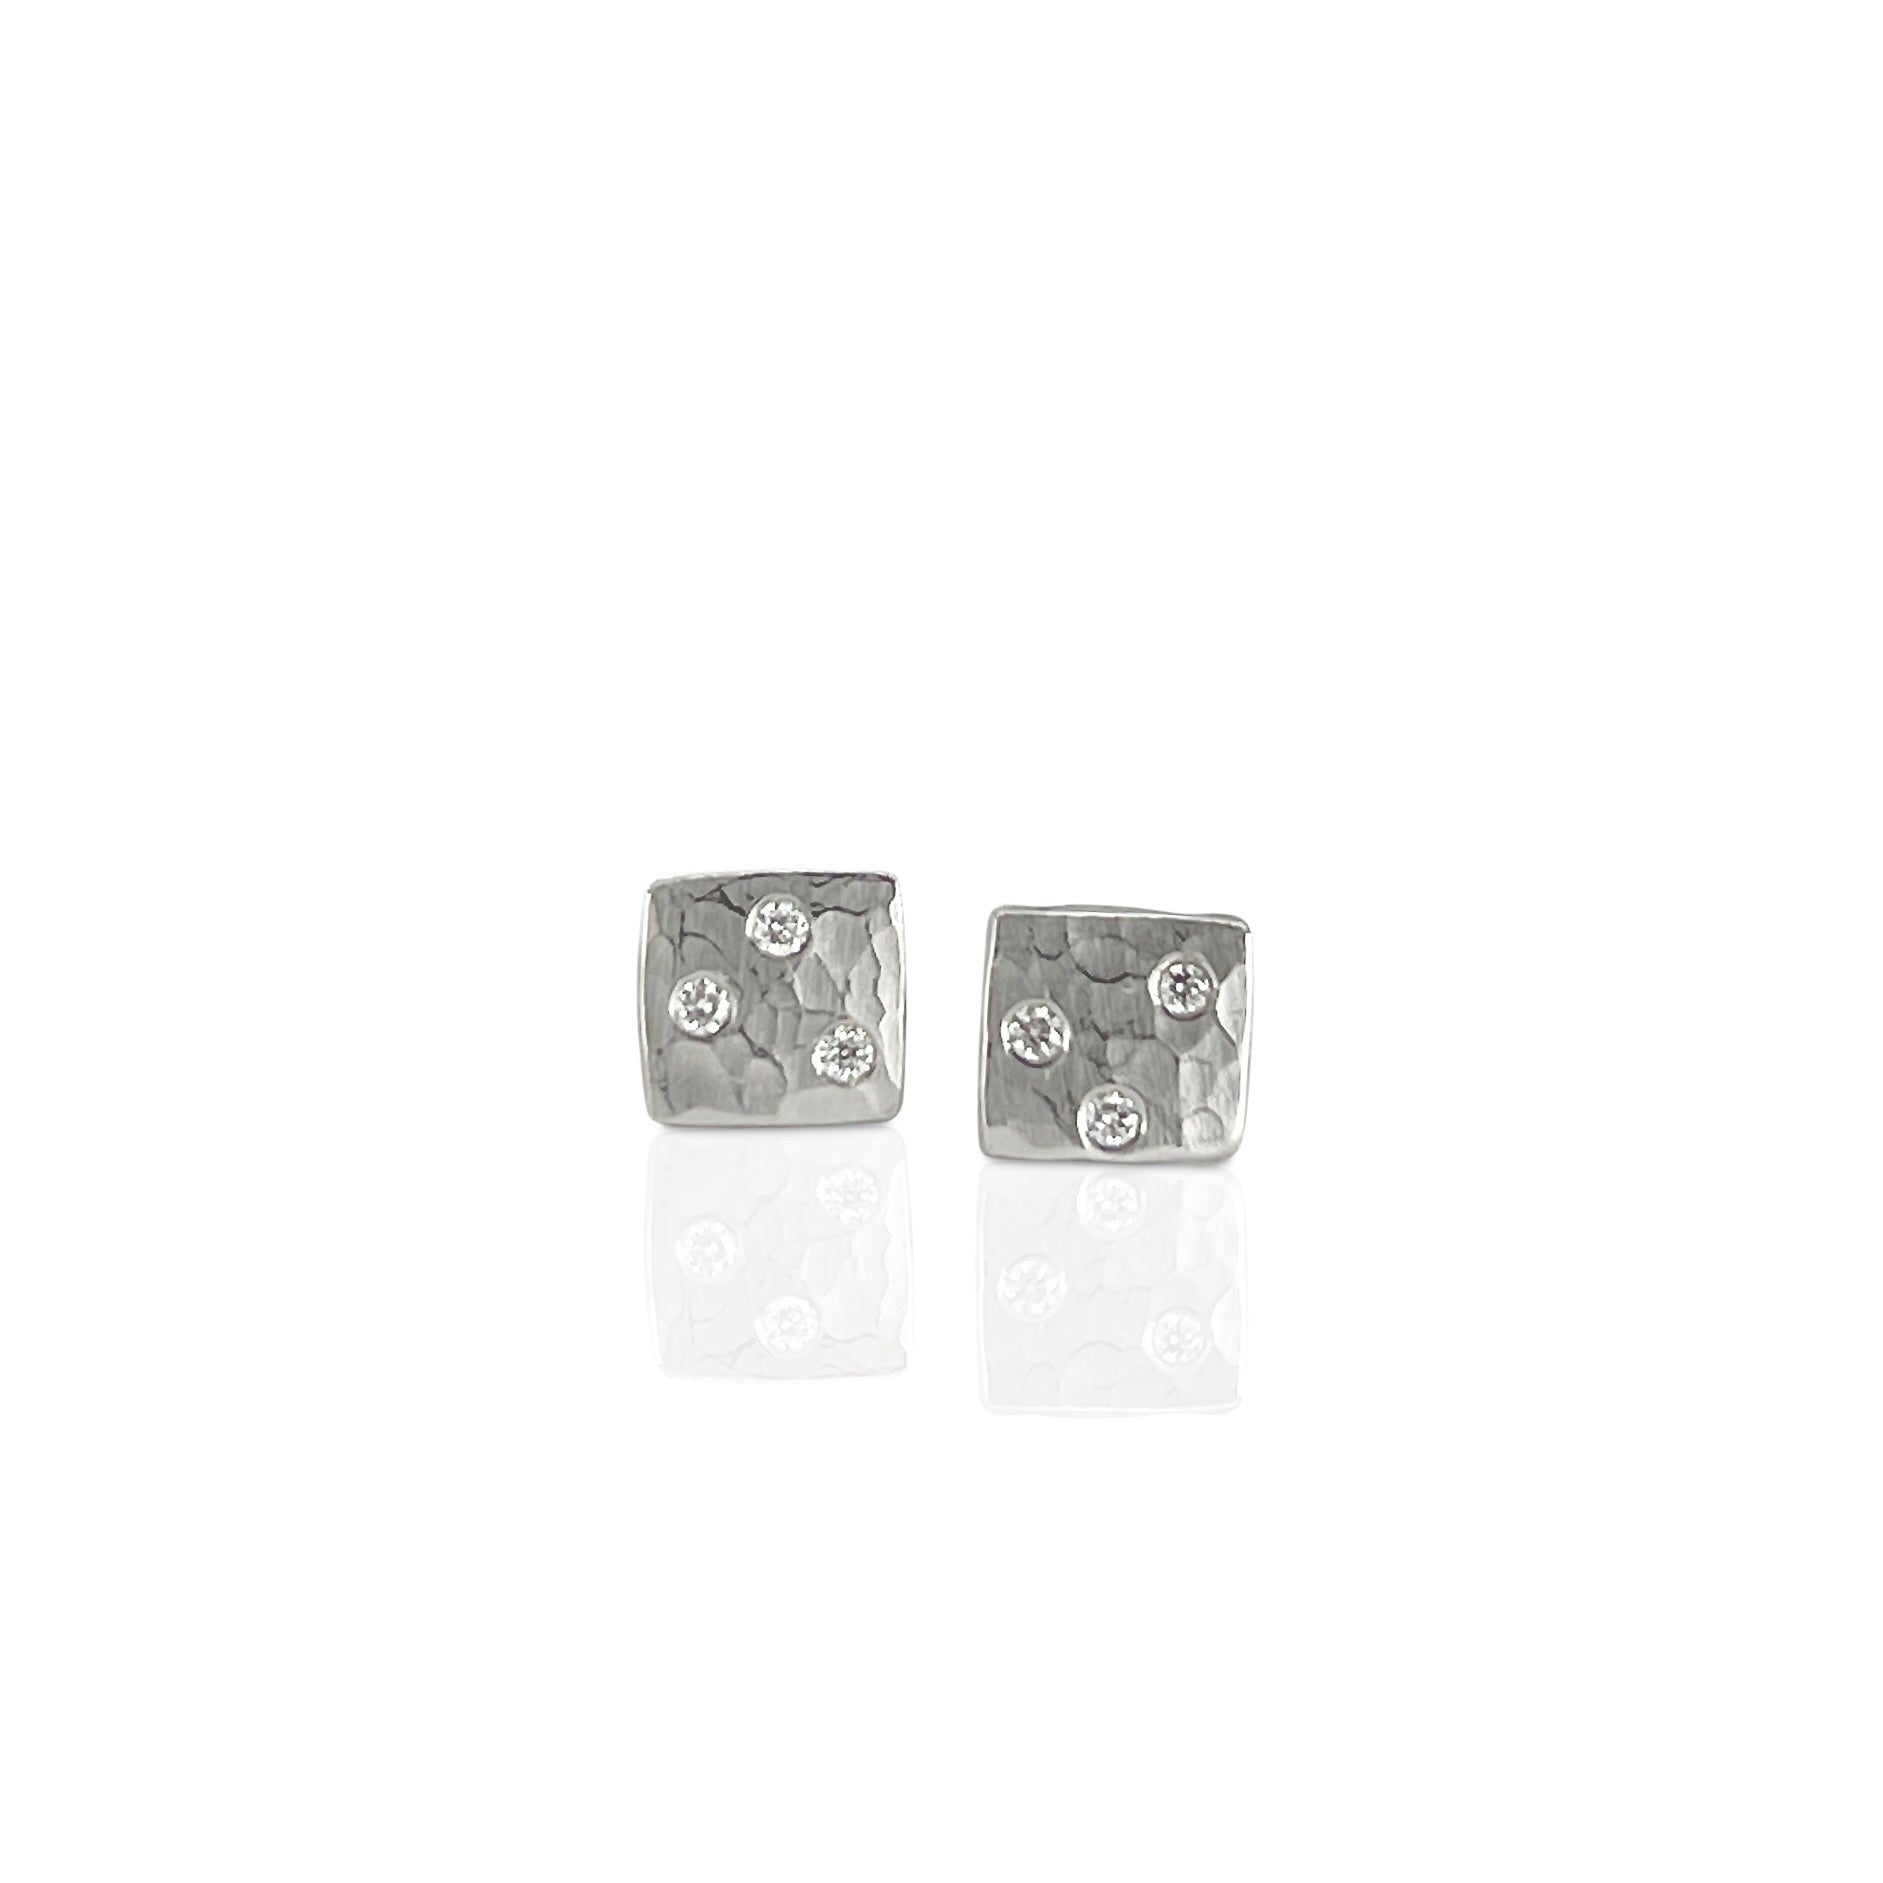 Nugget earrings with diamonds